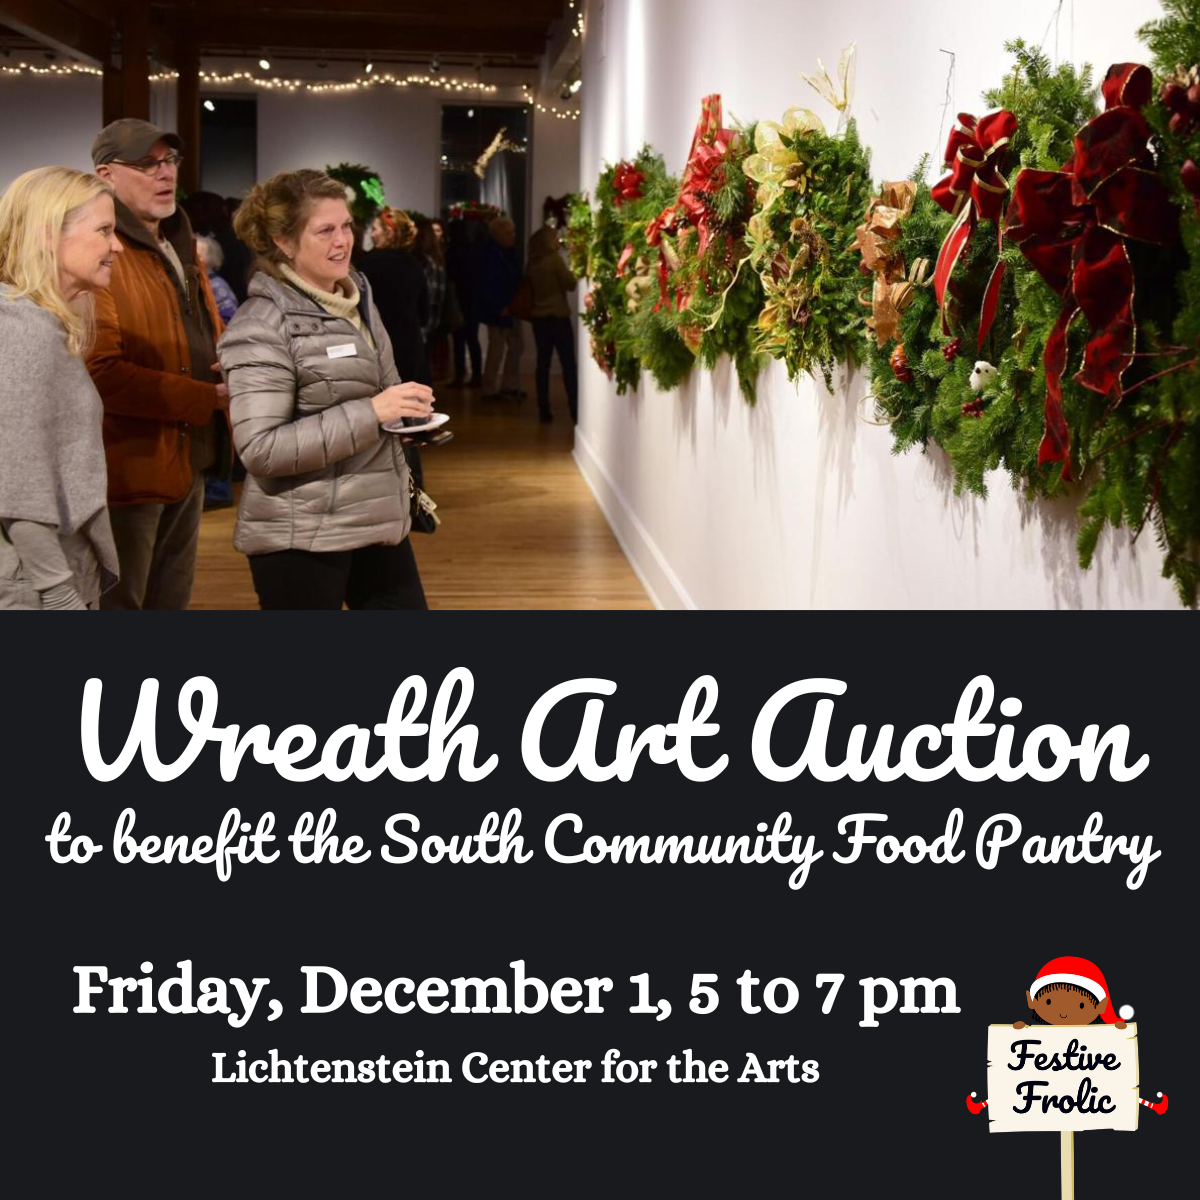 Wreath Art Auction to benefit the South Community Food Pantry